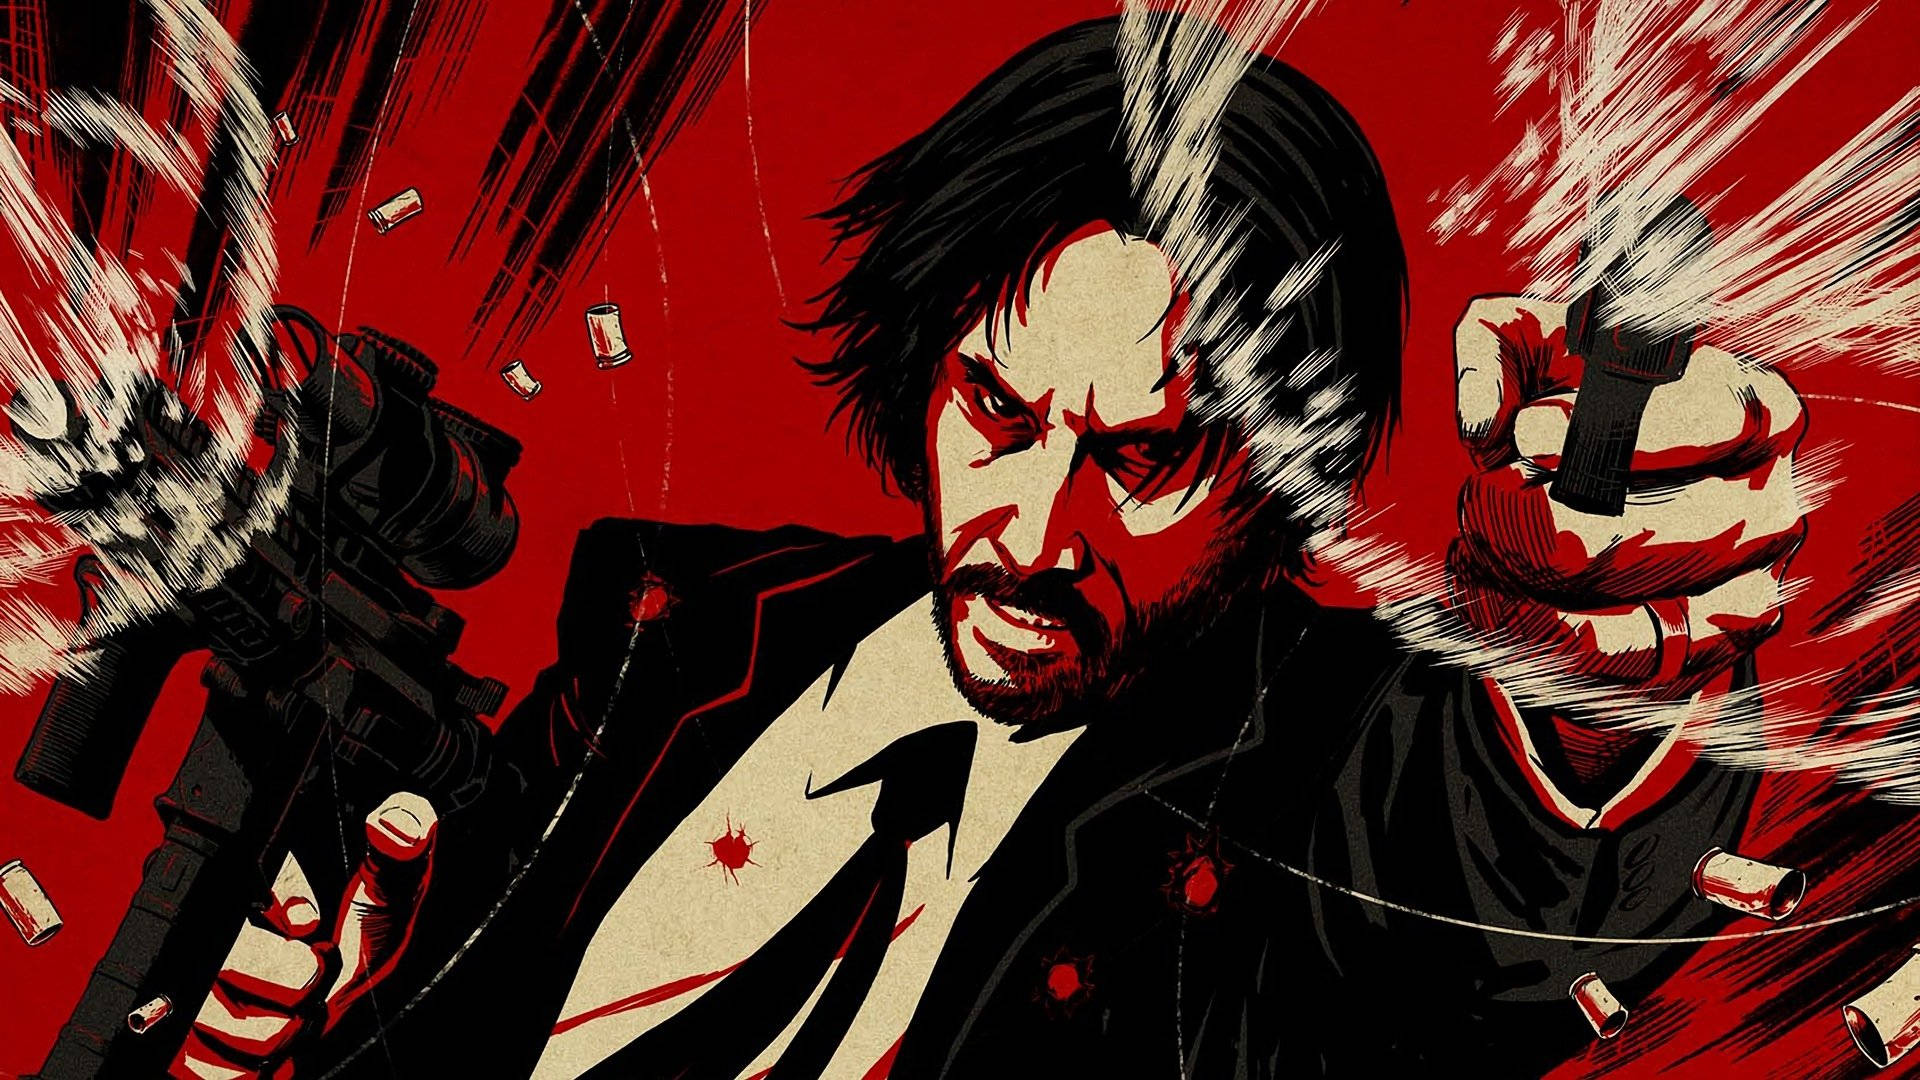 John Wick is never one to be forgotten. Wallpaper